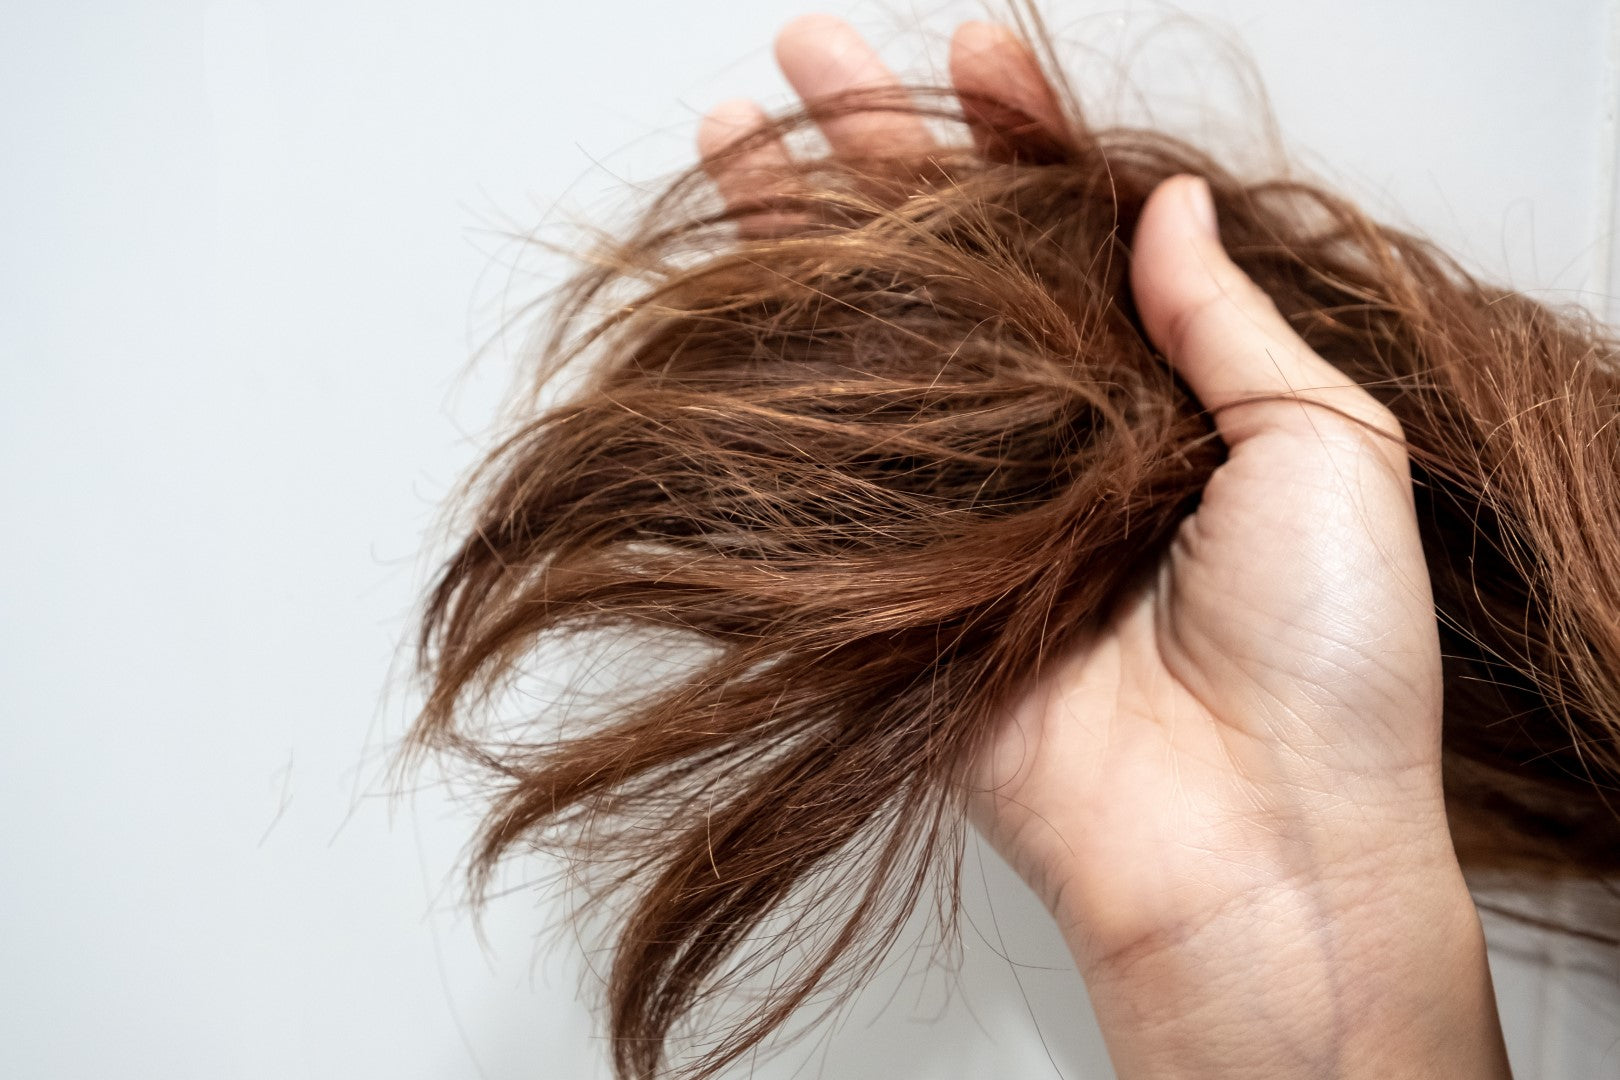 Signs you have dry hair